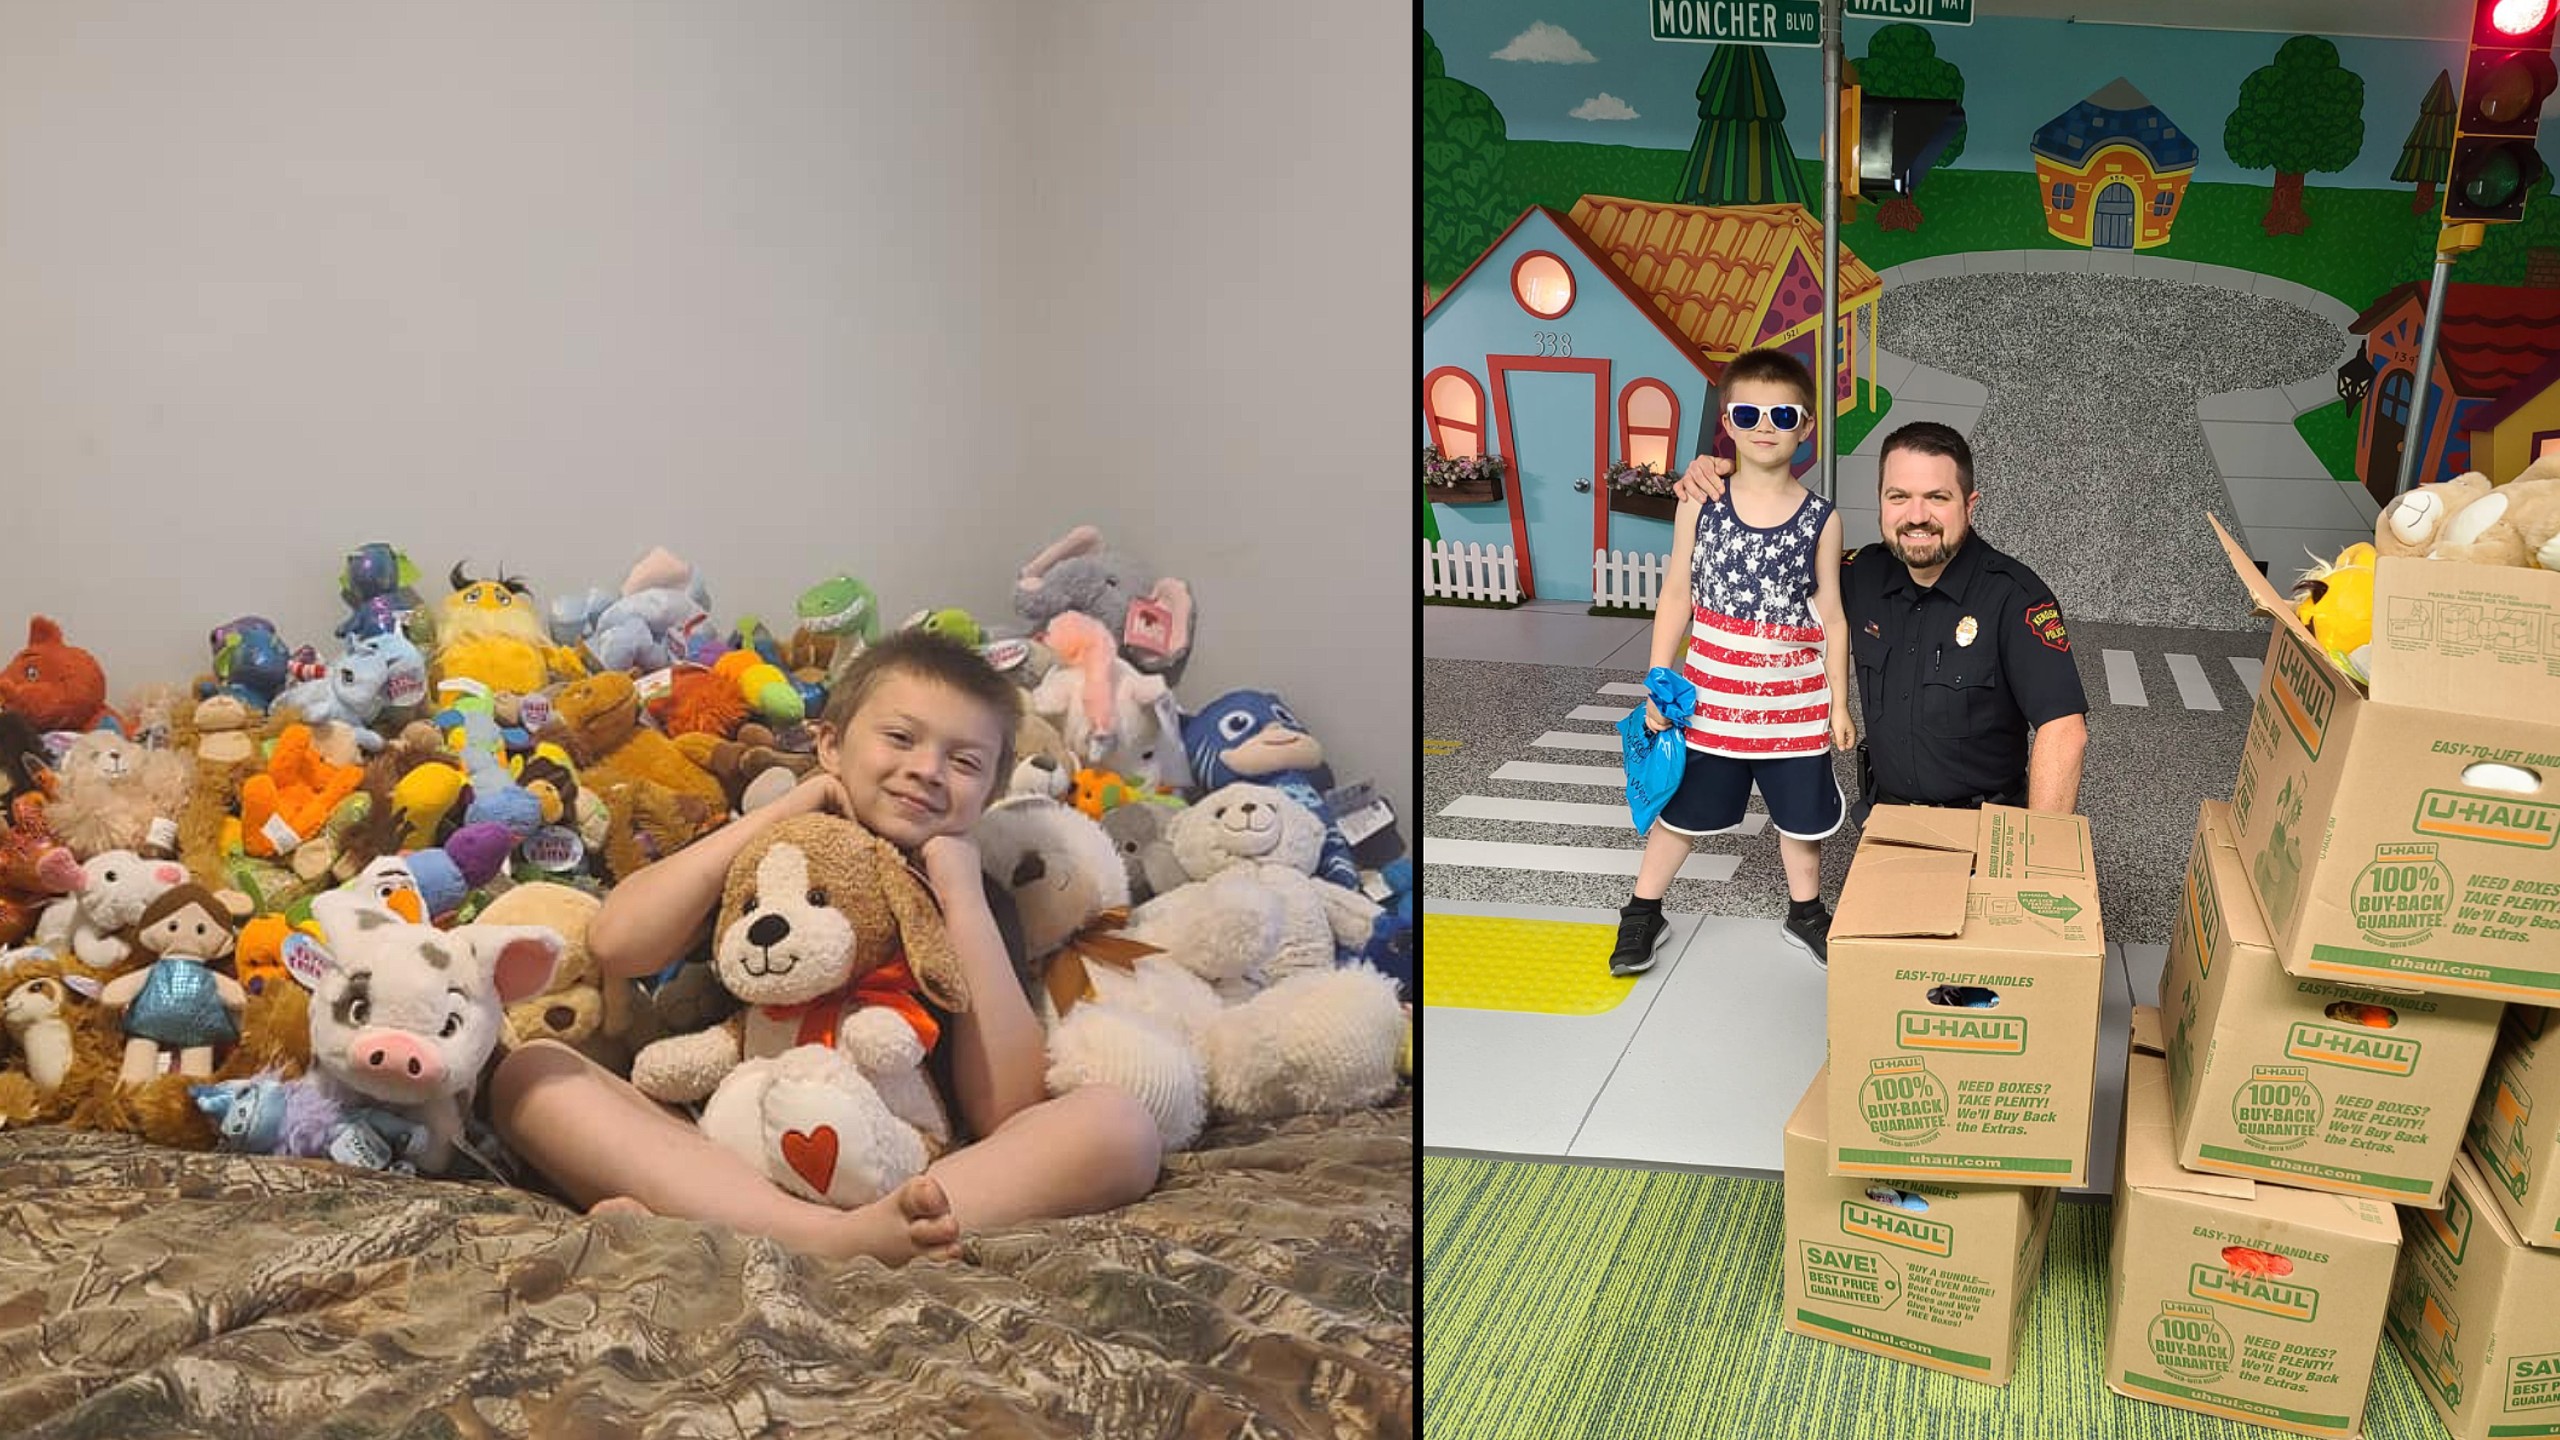 8-Year-old donates stuffed animals for his birthday